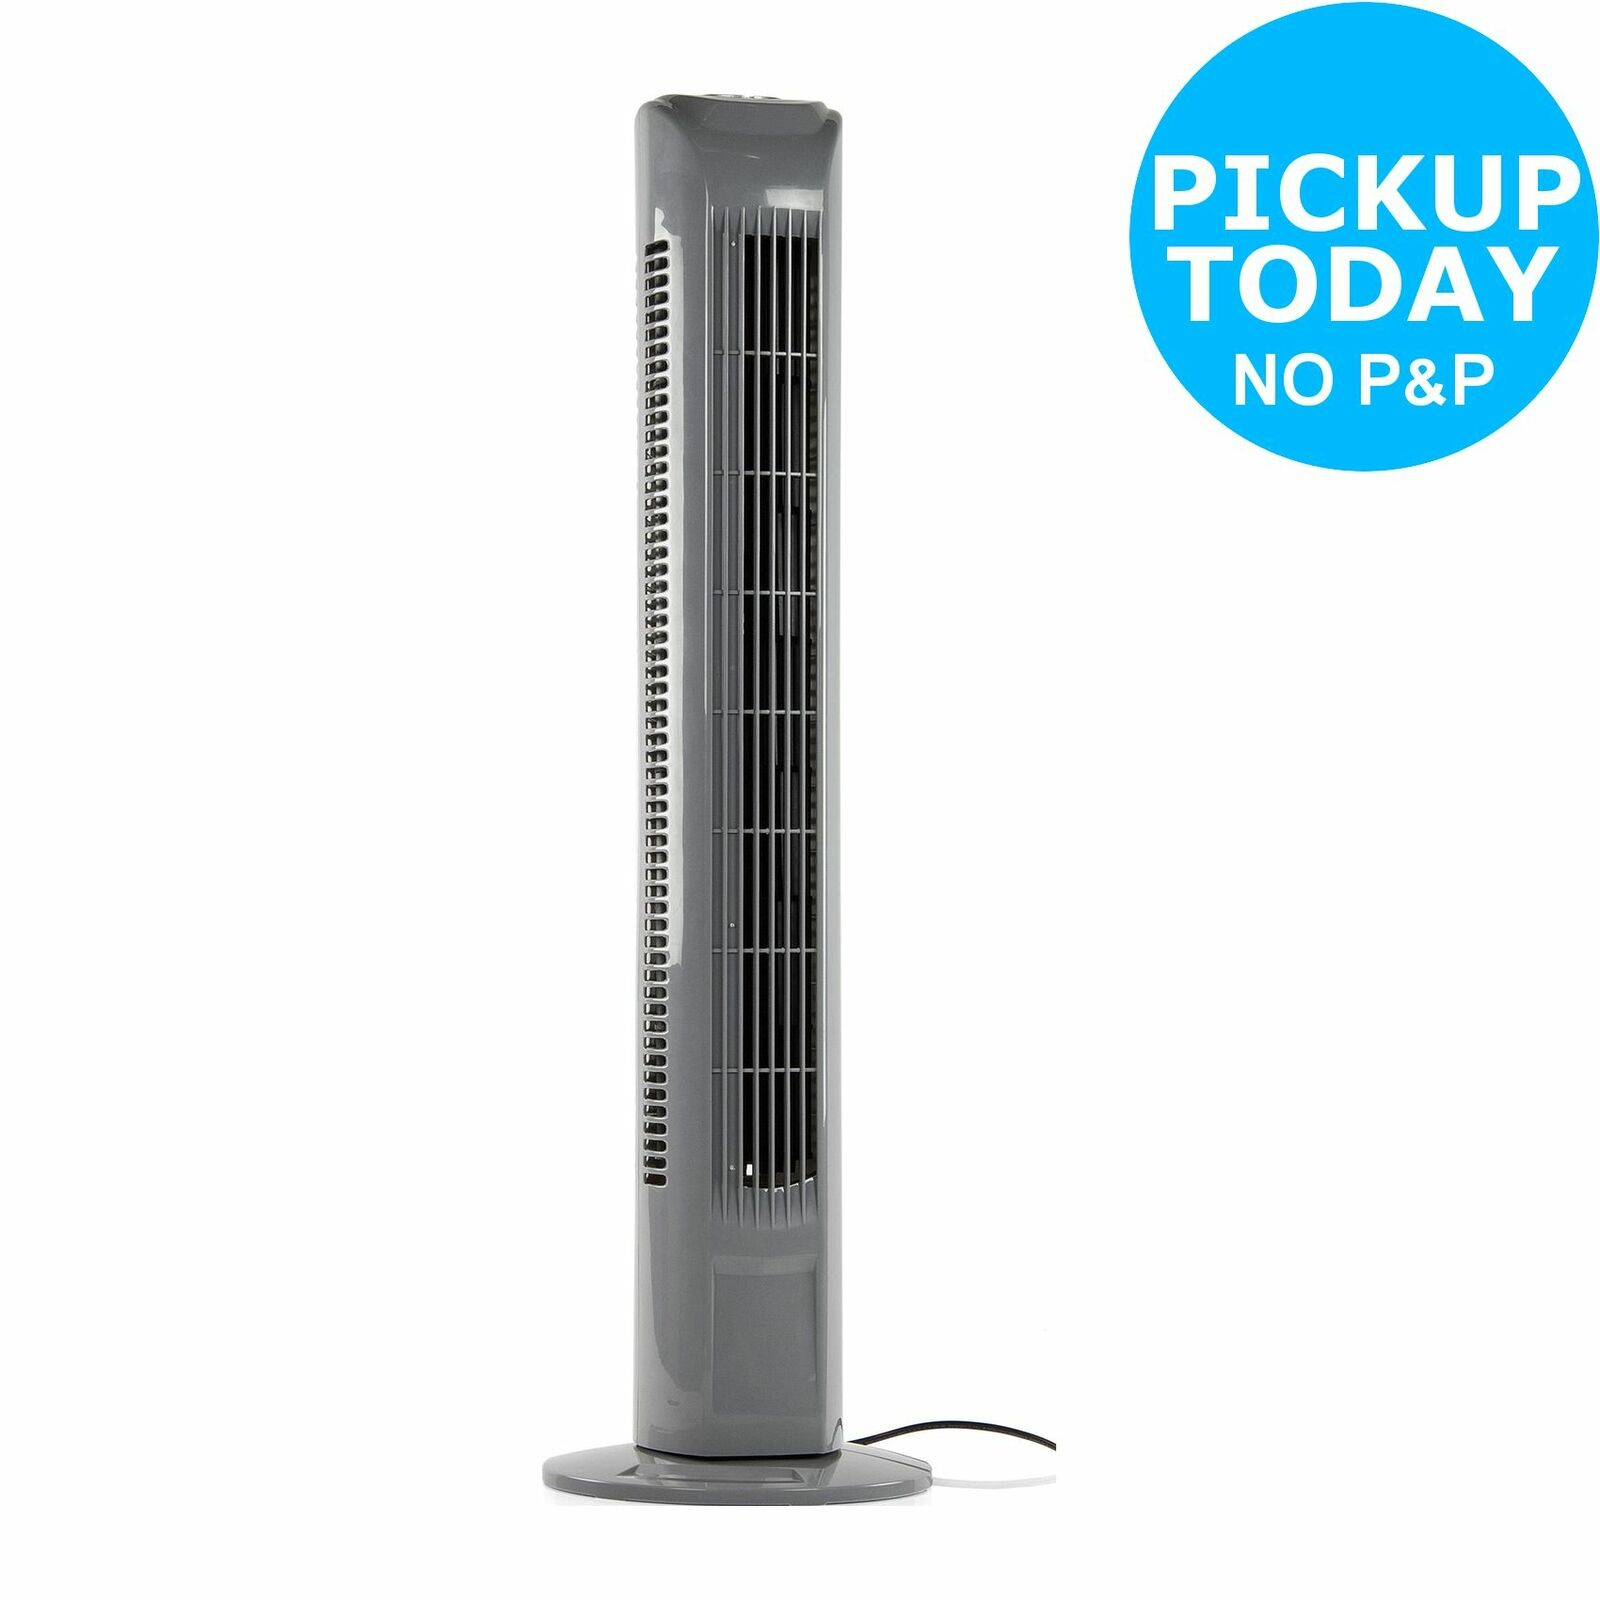 Challenge 2906102 Oscillating Tower Fan With Remote Control Grey intended for size 1600 X 1600